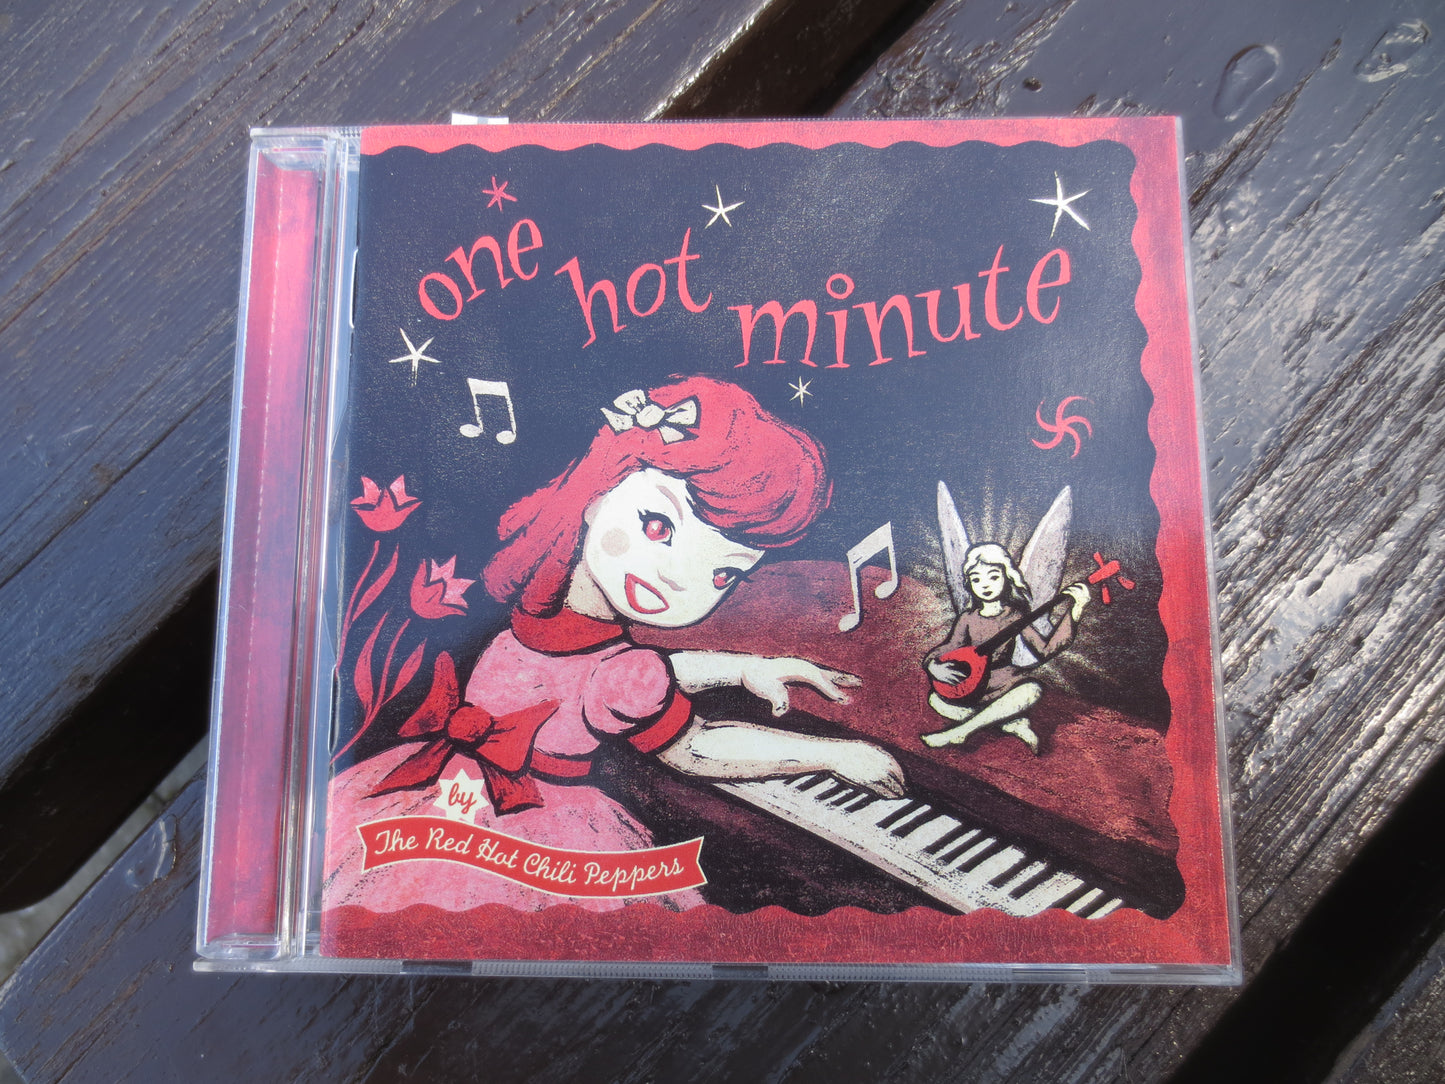 Red HOT, CHILE PEPPERS, One Hot Minute Cd, Chile Peppers Album, Rock Cd, Rock Music Cd, Vintage Rock Cd, 1995 Compact Discs